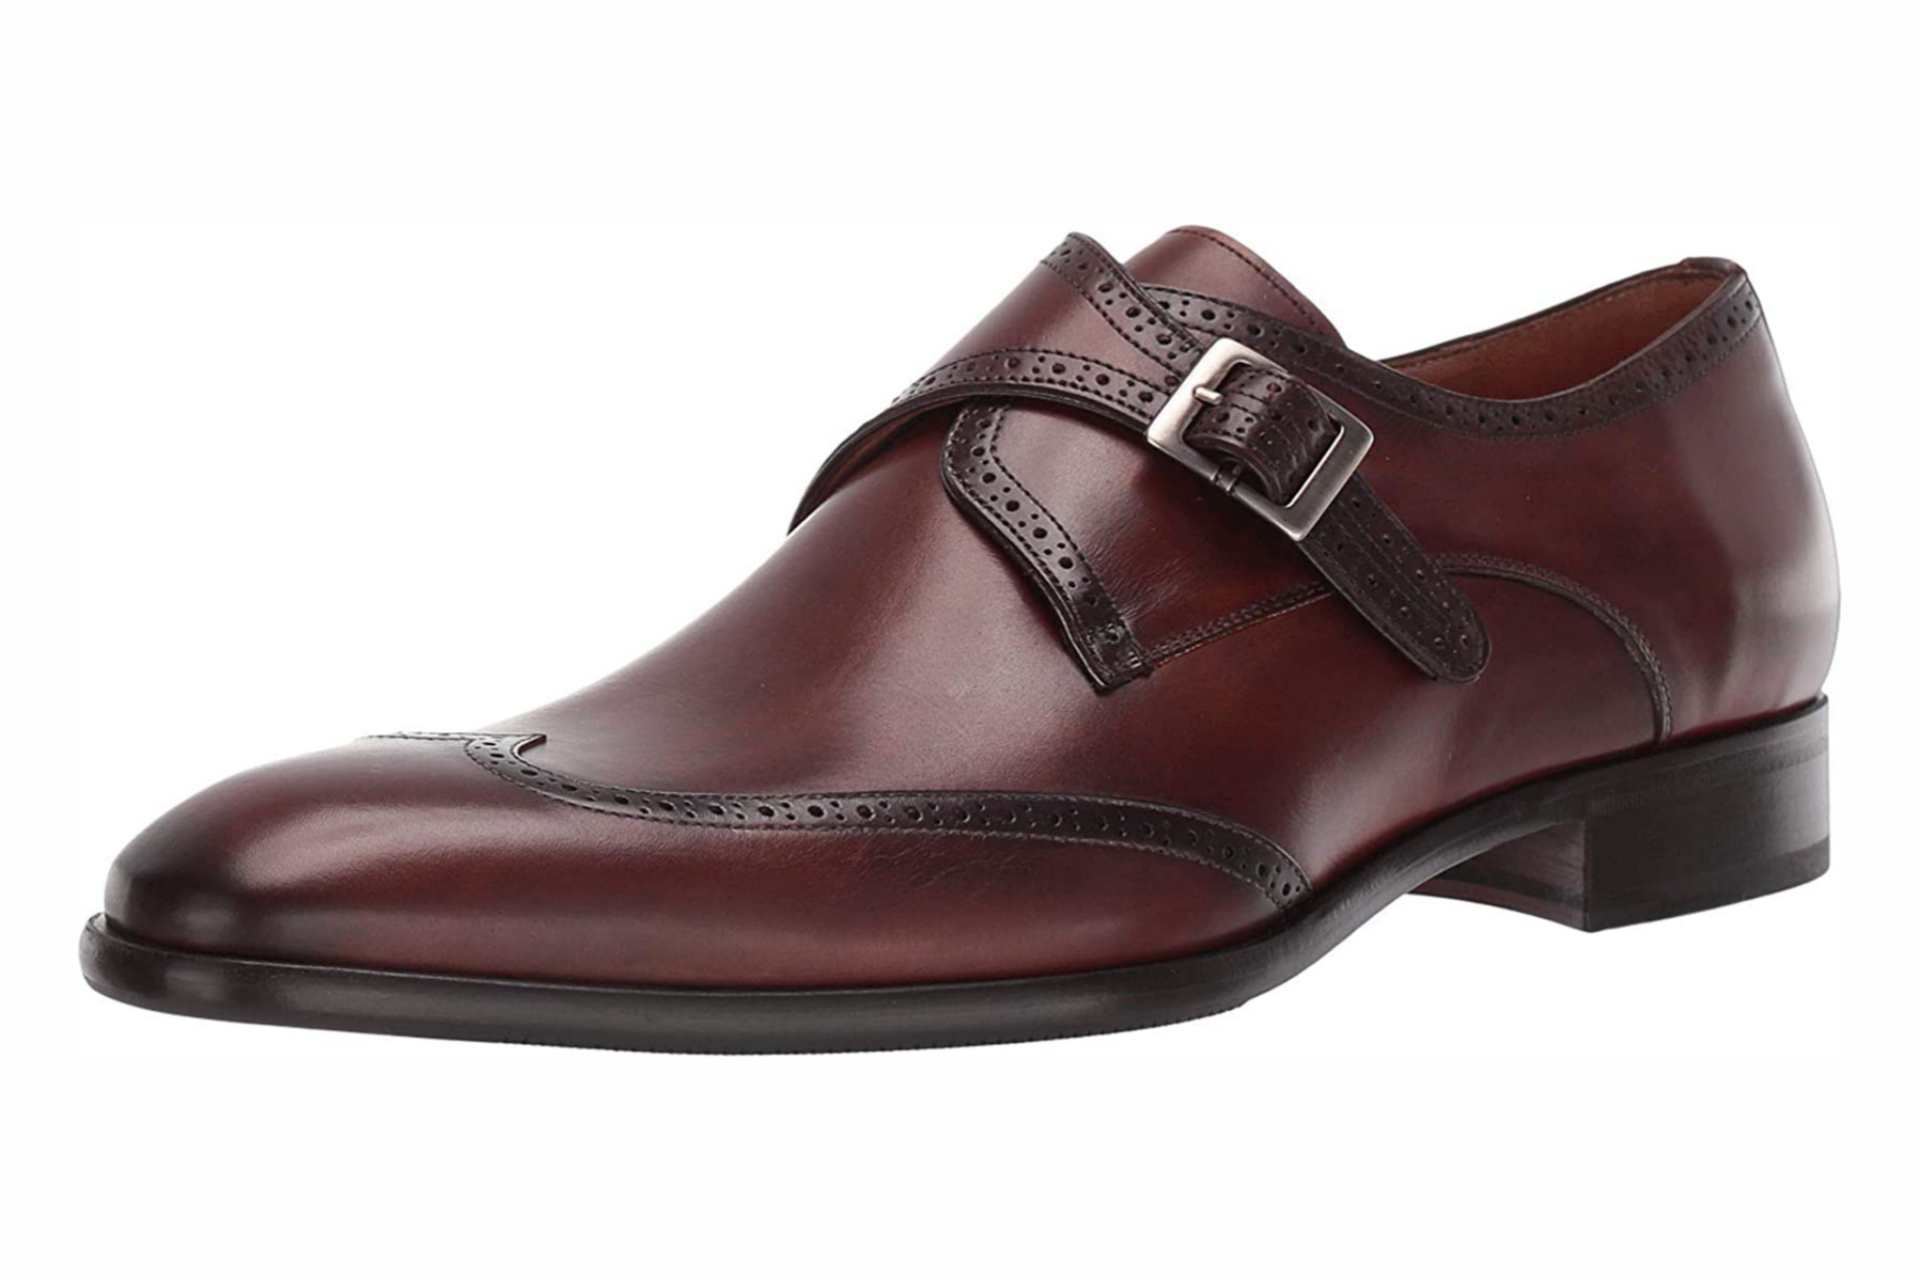 Best brown Monk Strap shoes 